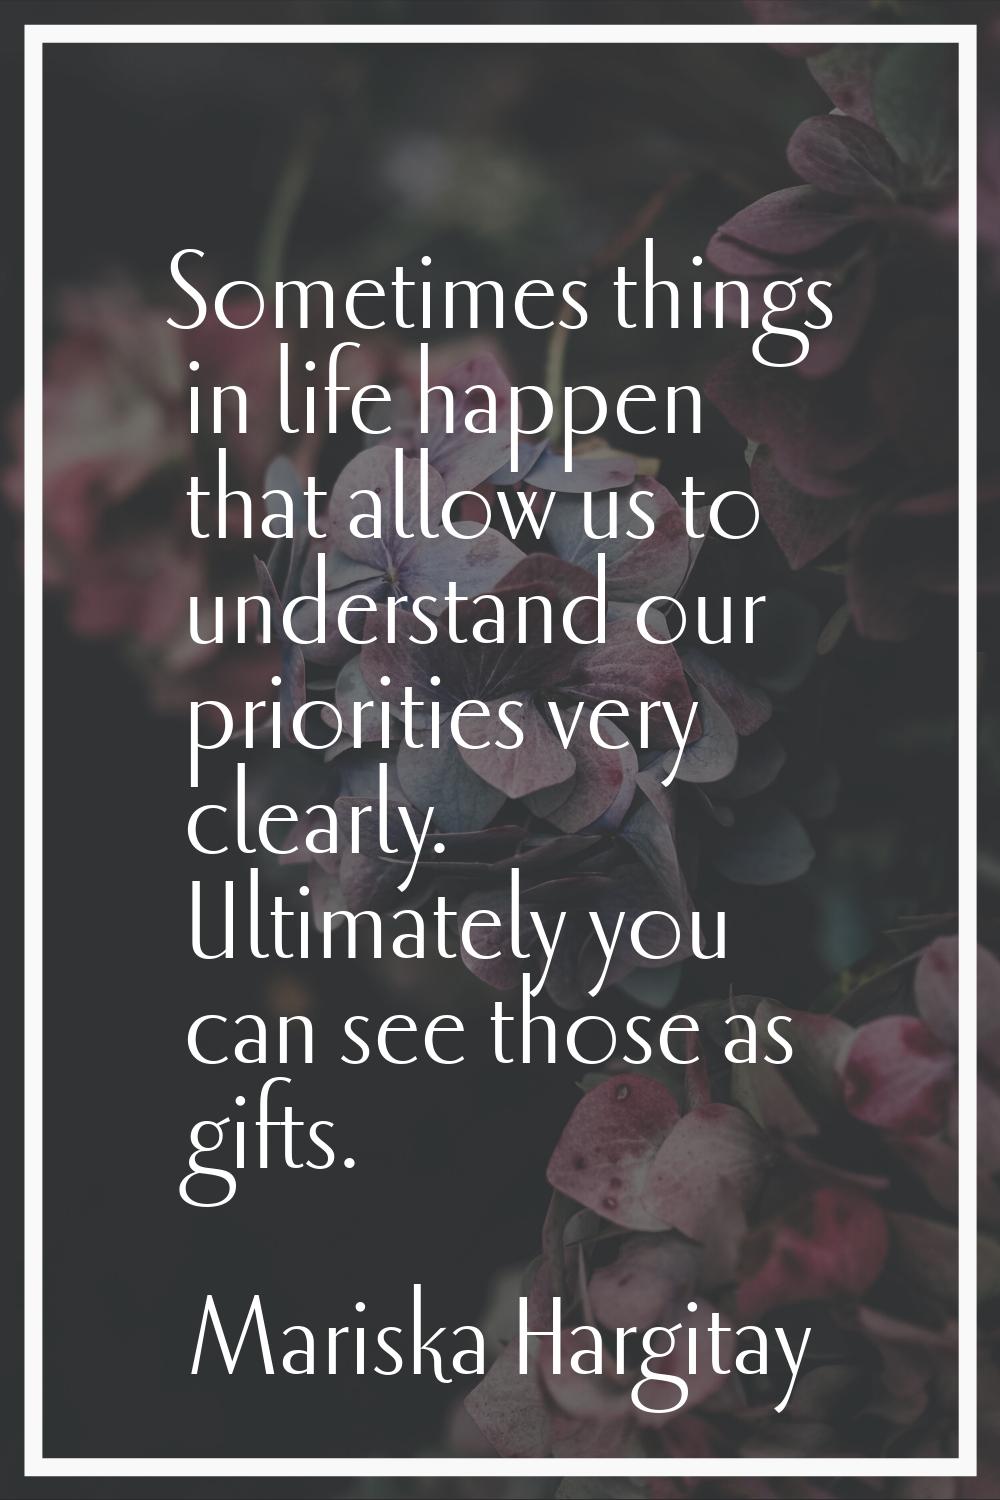 Sometimes things in life happen that allow us to understand our priorities very clearly. Ultimately